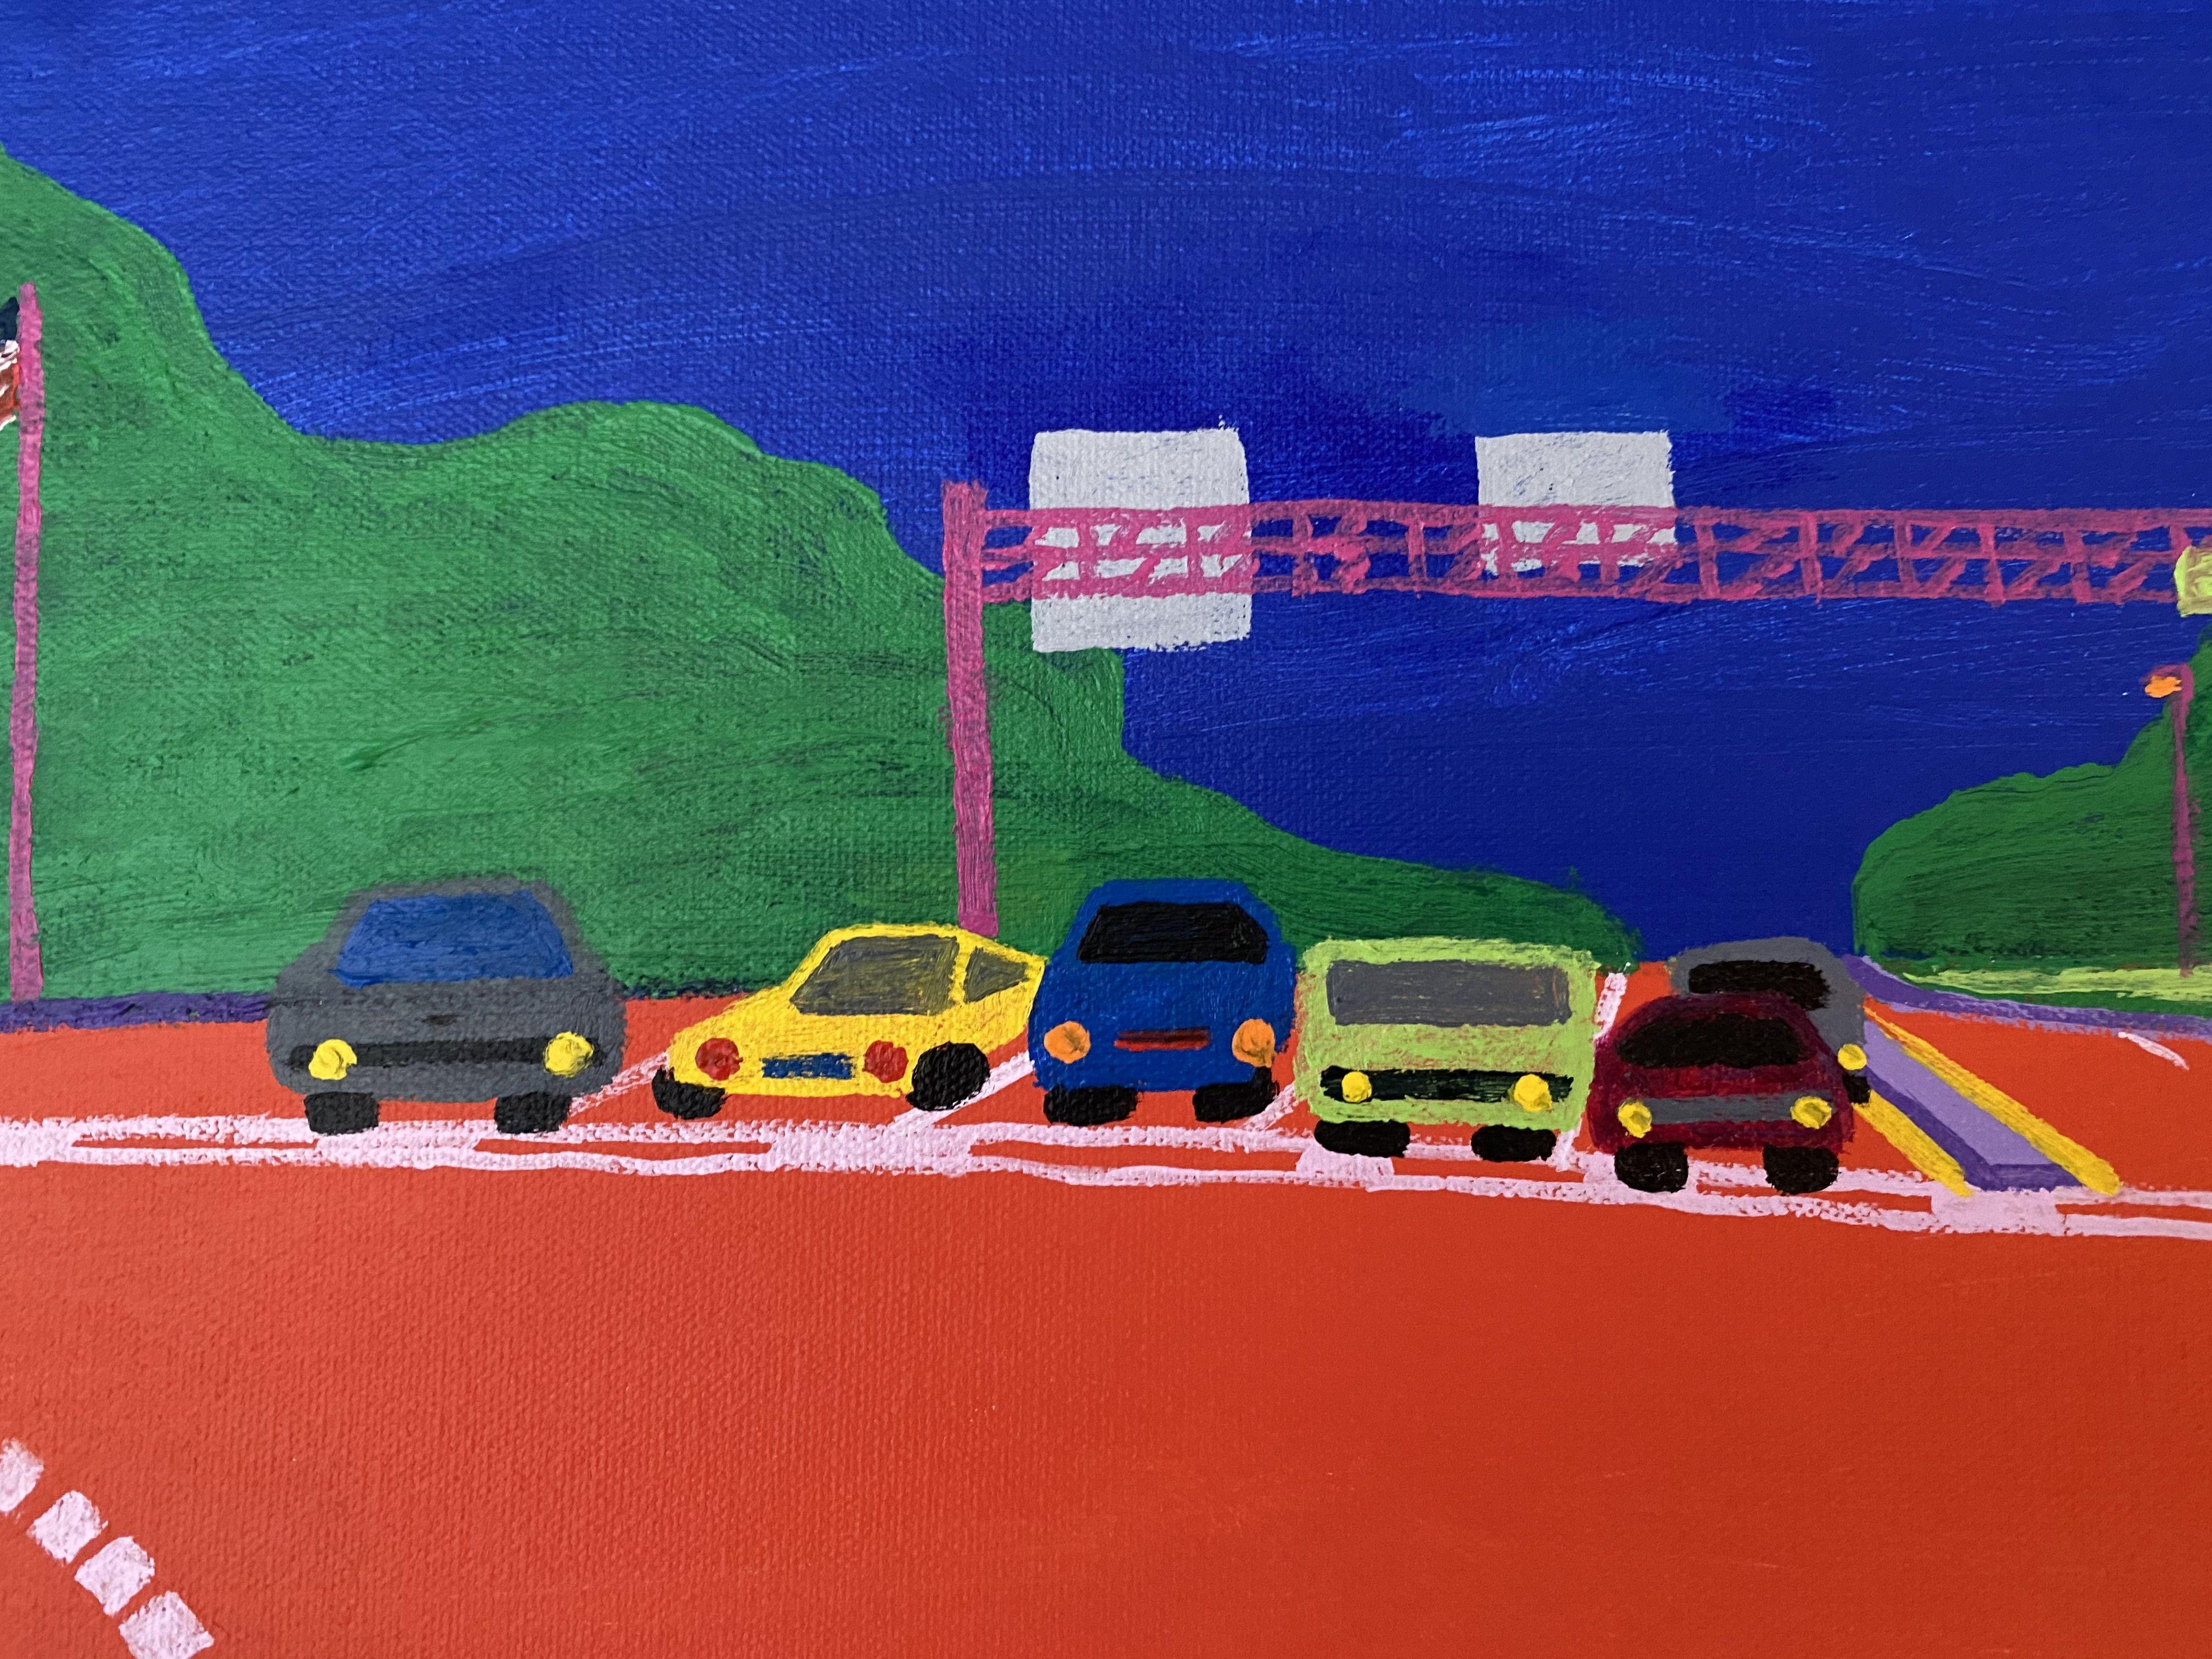 I sat many hours over the last 2 decades at this intersection waiting for the light to turn green. So...I decided to paint it about a year ago and did so. That painting is called 